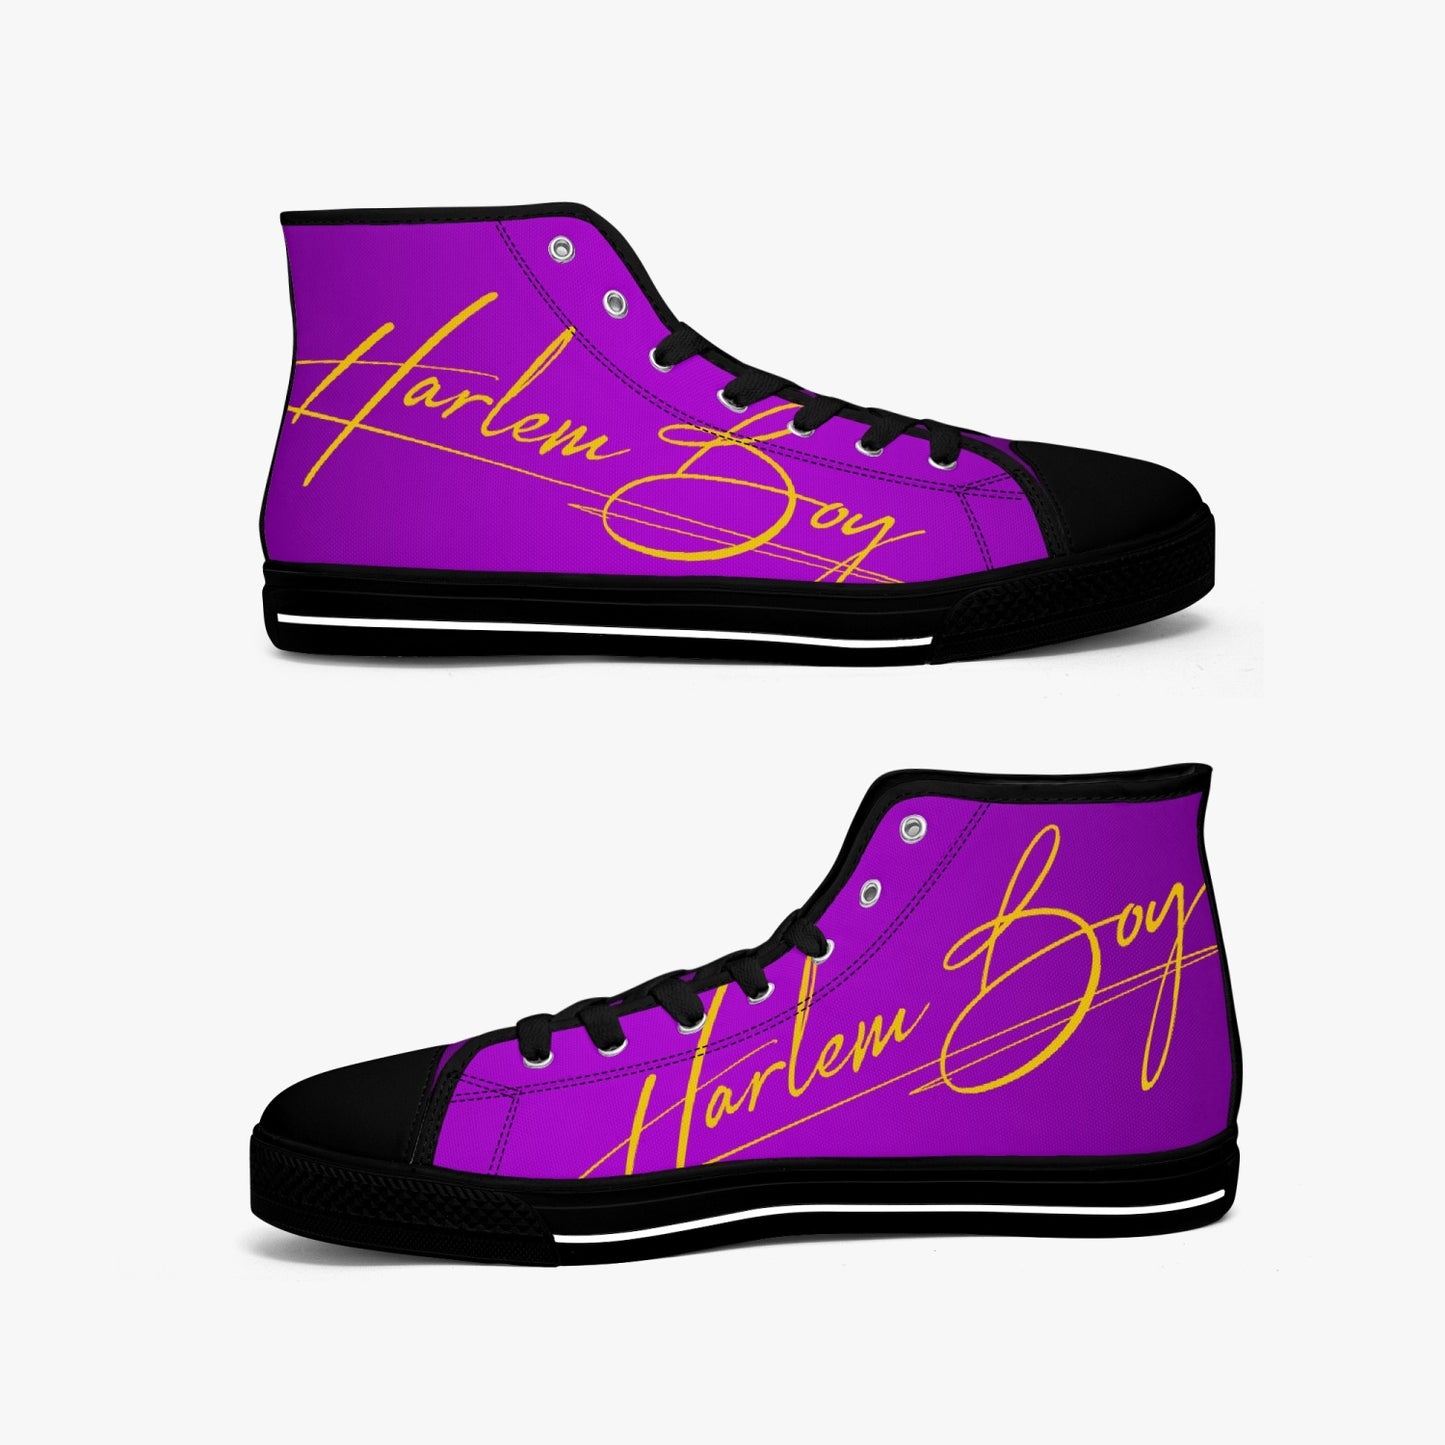 HB Harlem Boy "Lenox Ave" Classic High Top - Purple and Gold - Men (Black or White Soles)